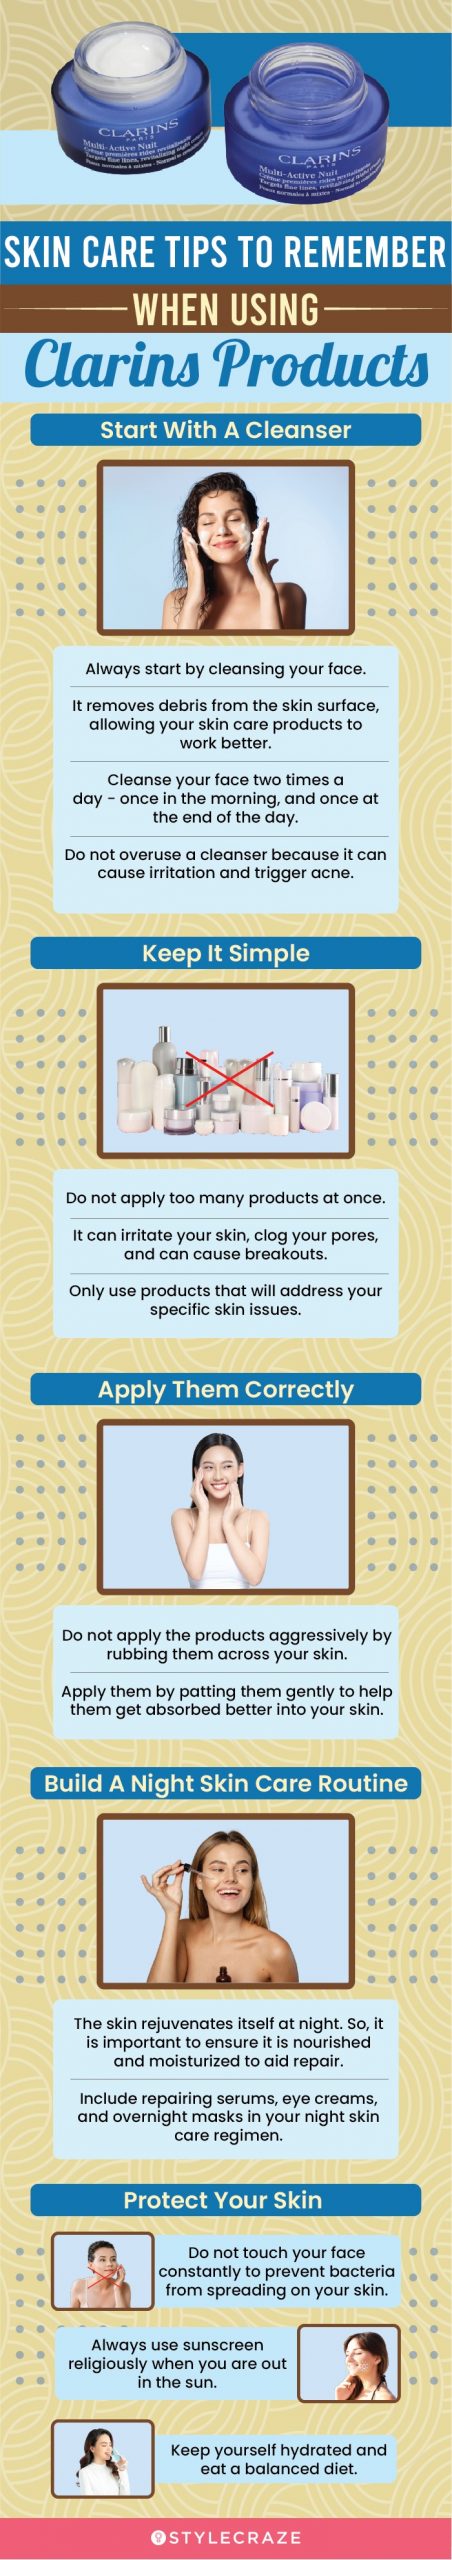 Skincare Tips To Remember When Using Clarins Products (infographic)